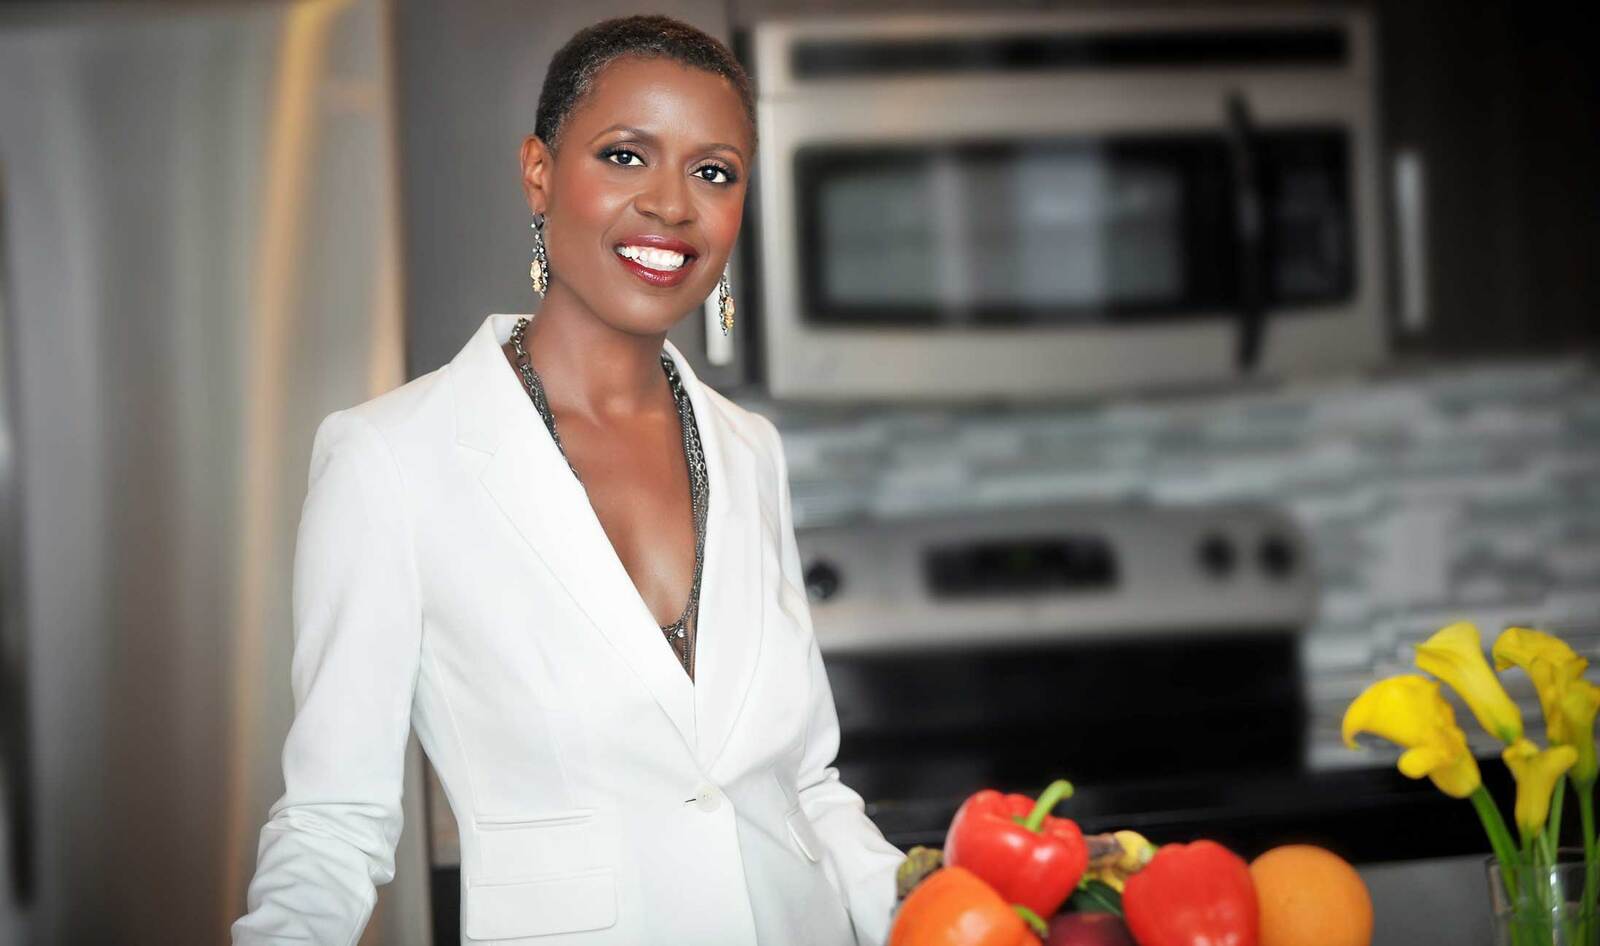 Nutritionist Sets Out to Help 10,000 Black Women Go Vegan in 2020